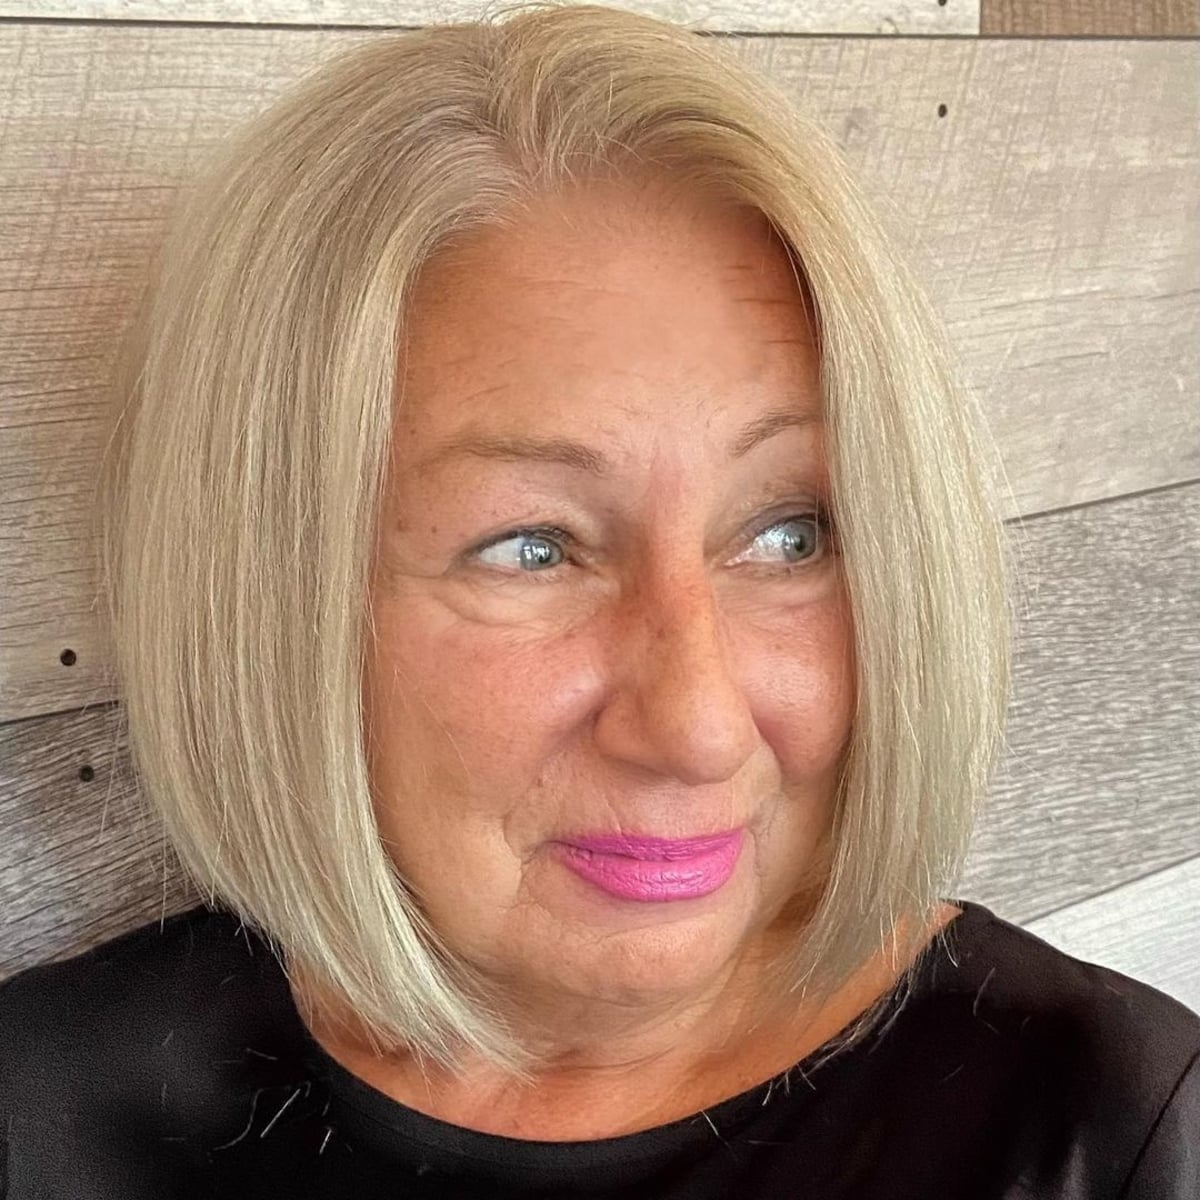 Bob for women over 60 with straight hair and round face